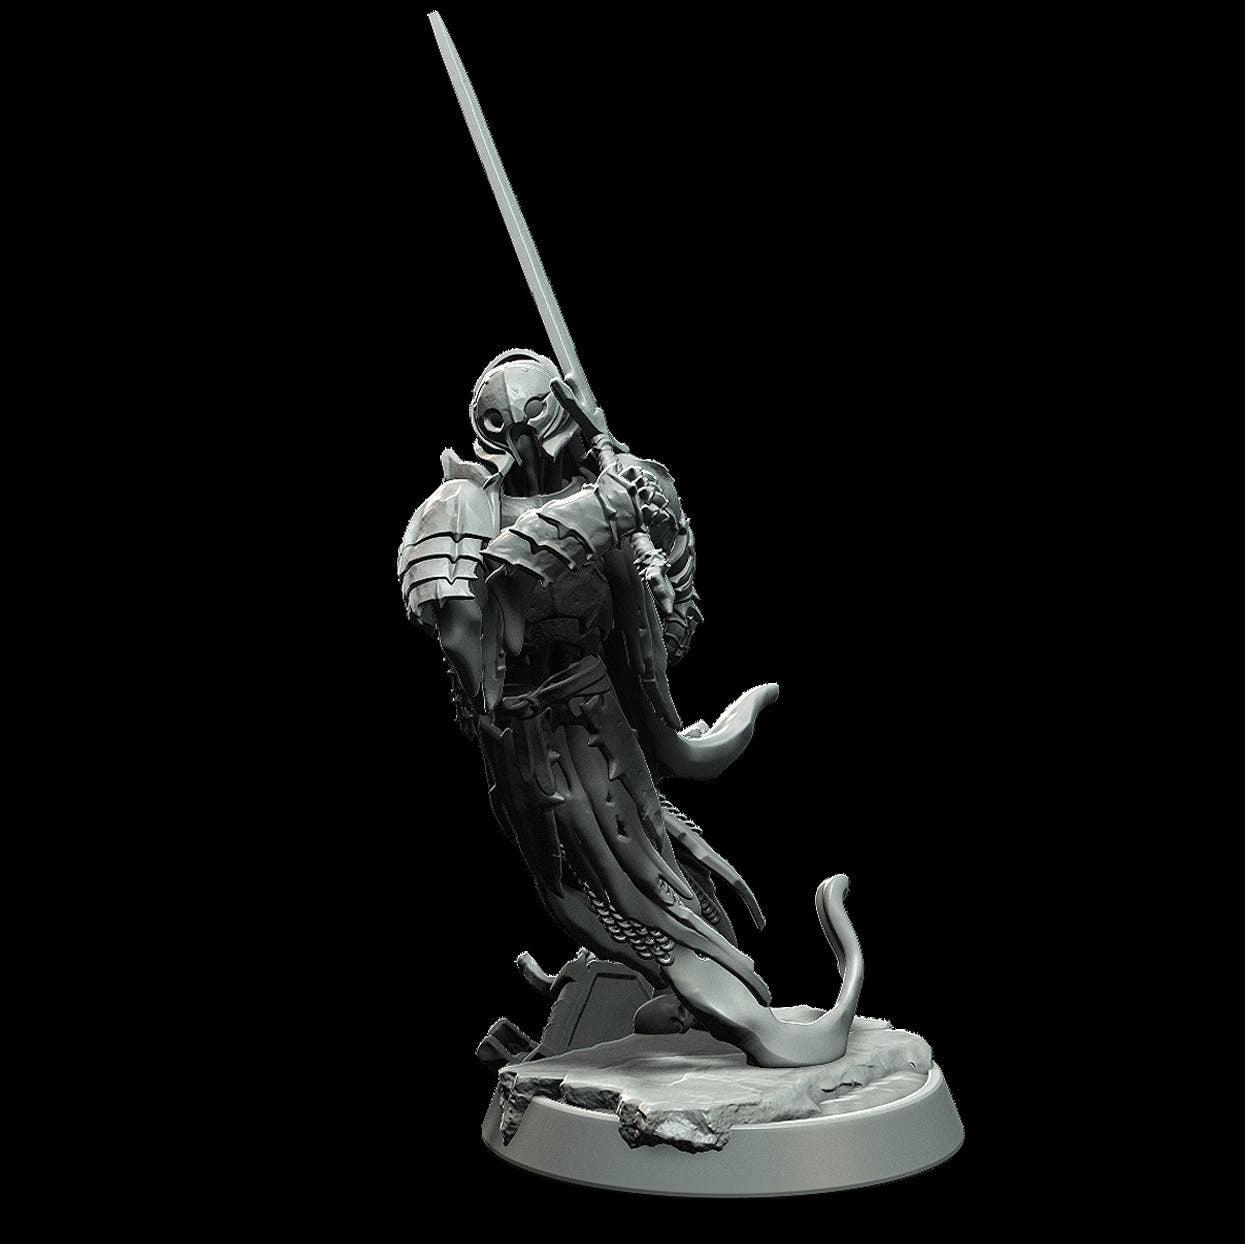 Undead Miniature Undead warrior Phantom Miniature - 3 Poses - 28mm scale Tabletop gaming DnD Miniature Dungeons and Dragons dnd 5e - Plague Miniatures shop for DnD Miniatures